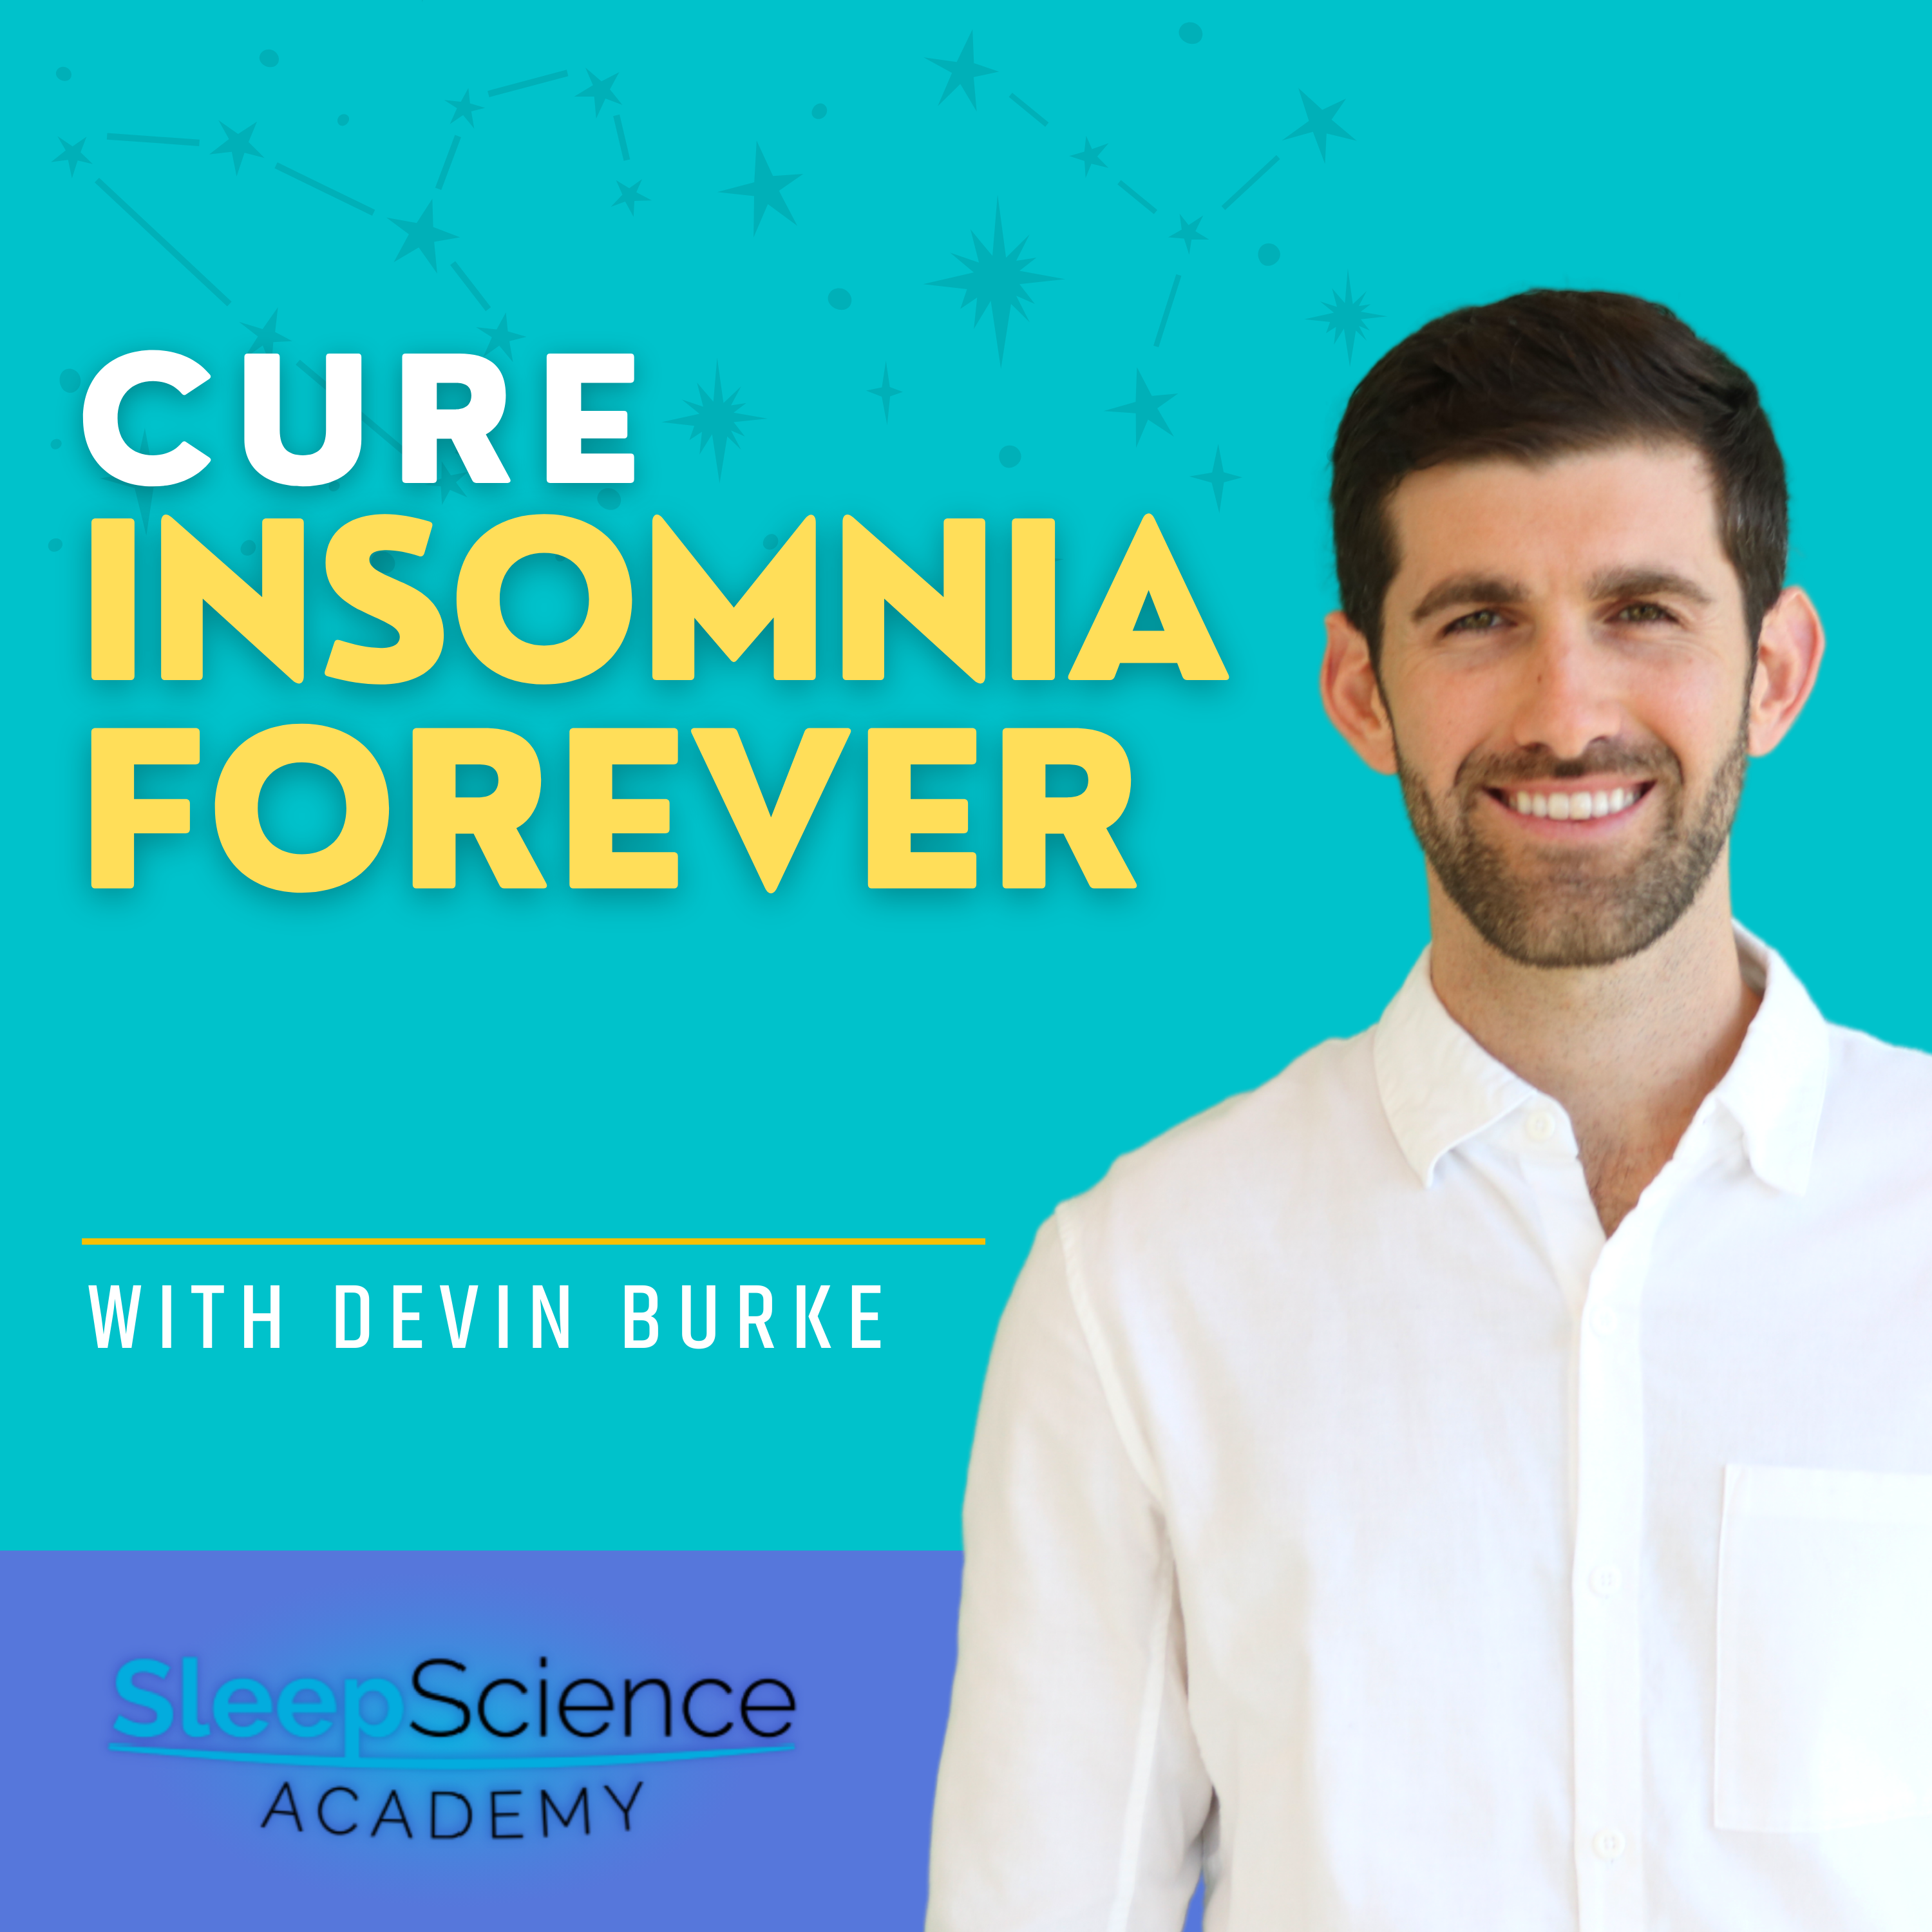 What is the Best Treatment for Insomnia?